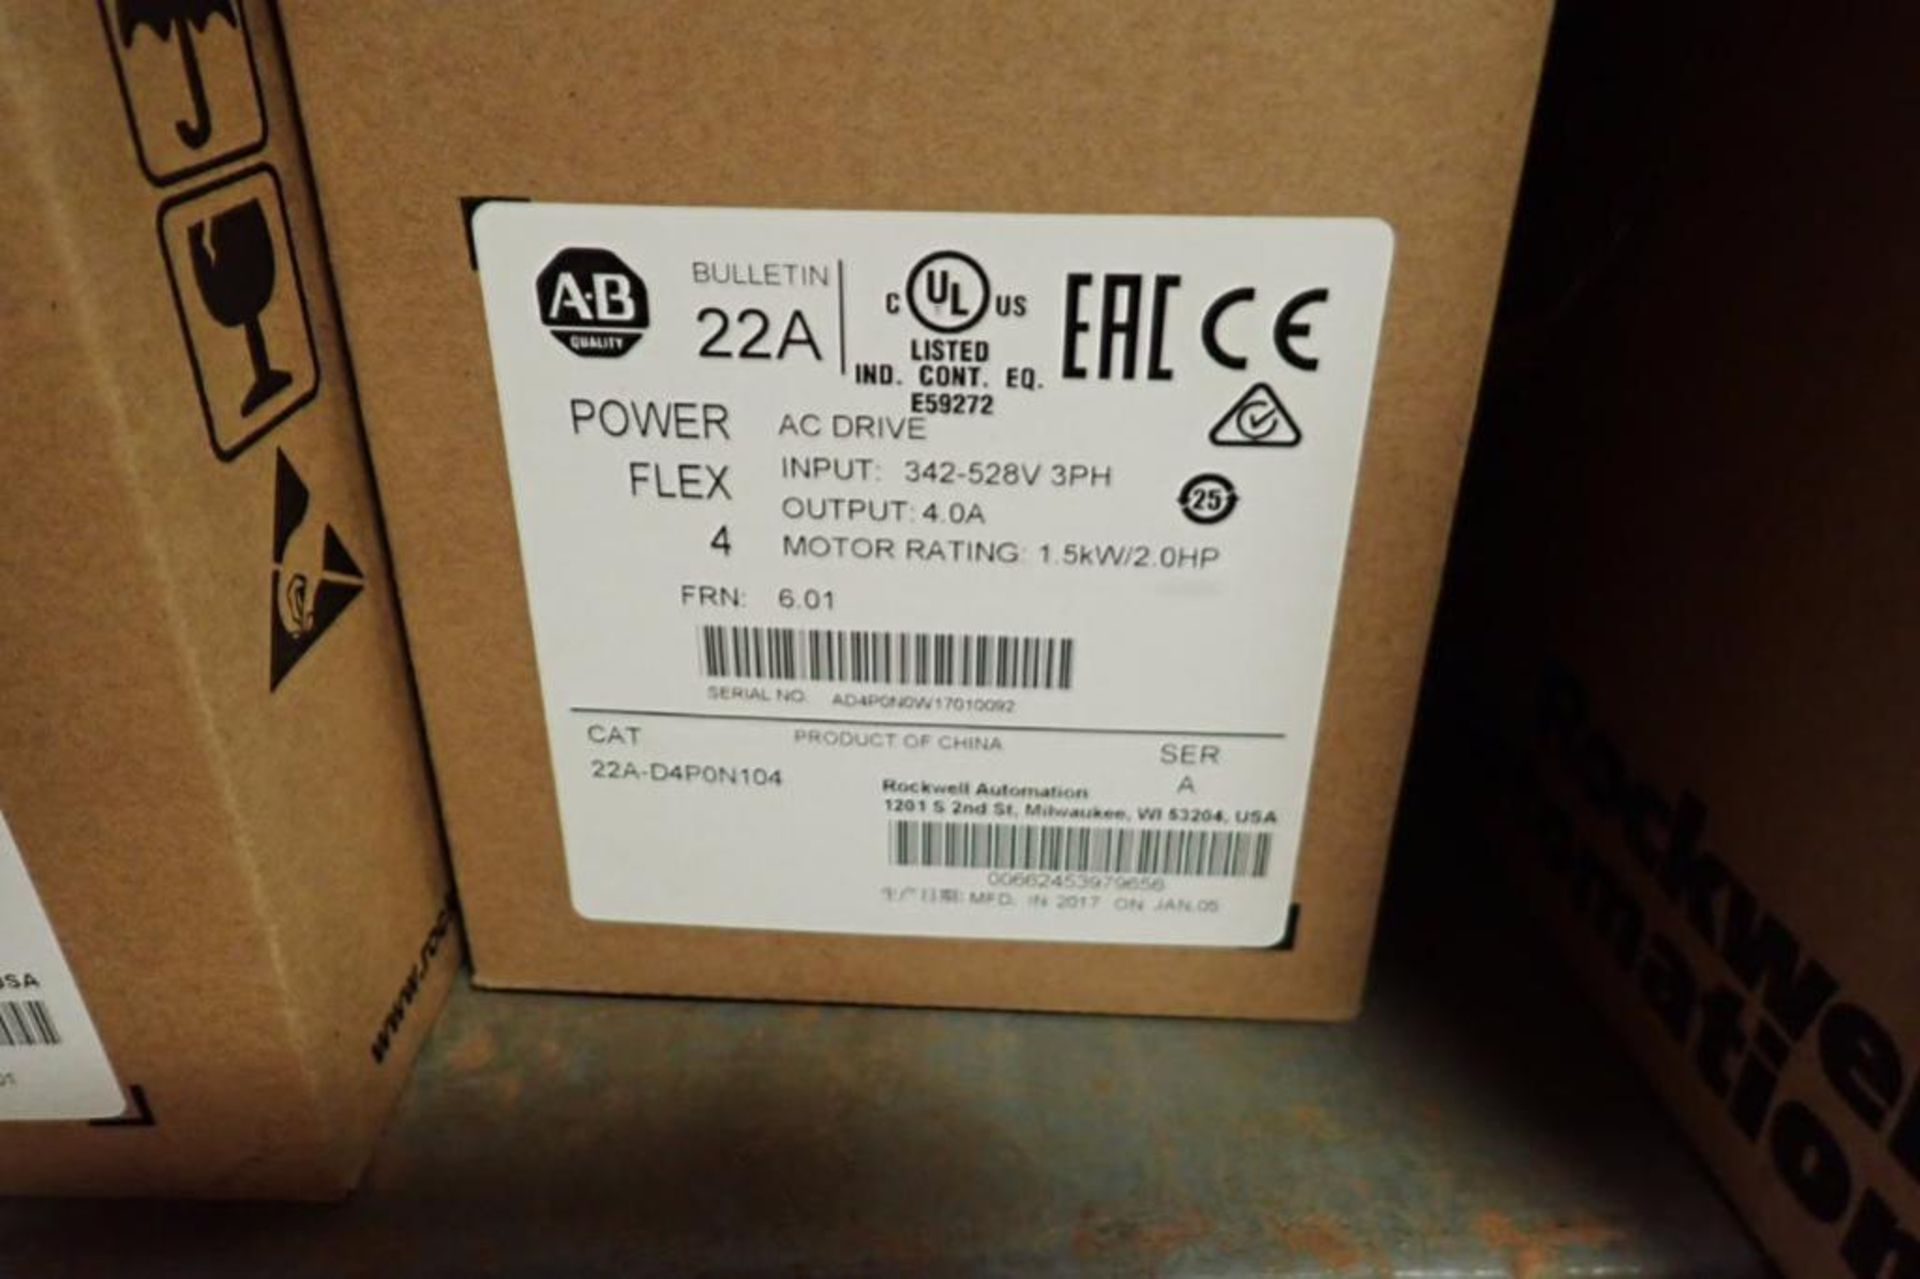 Contents only of 1 section of shelving, Allen Bradley vfds, power flex 4, 4m, 40, 525, Loma scale he - Image 15 of 43